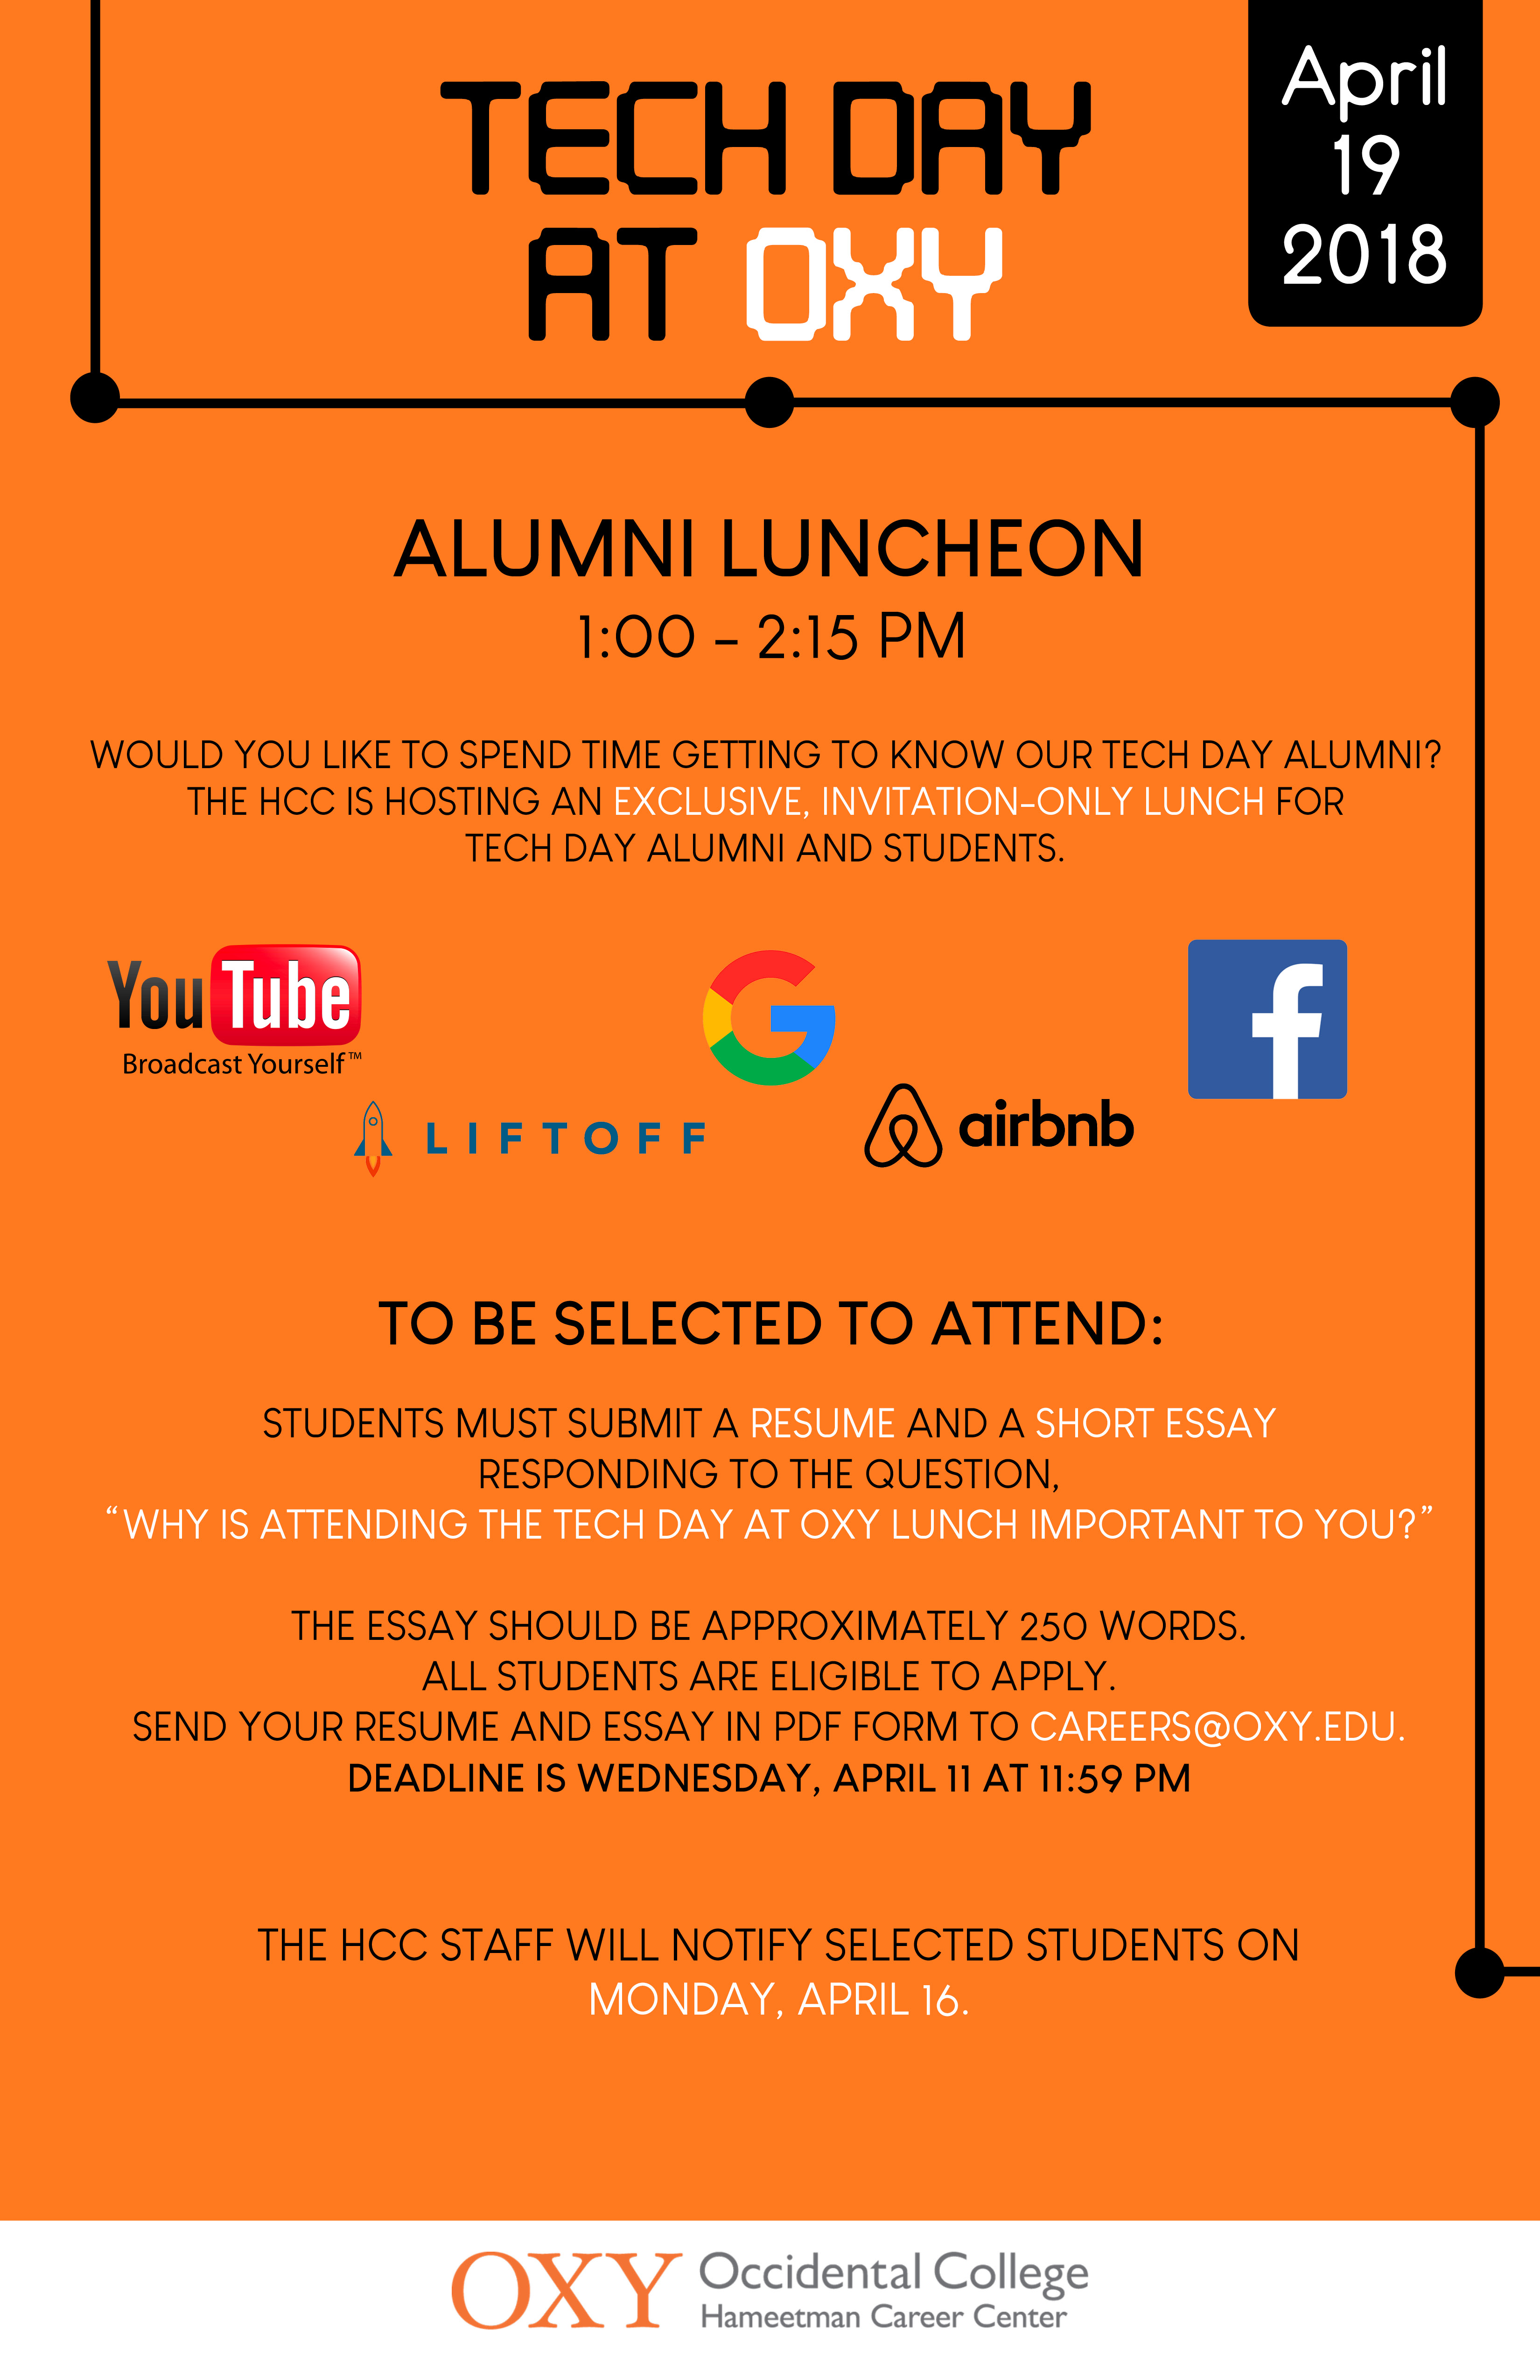 Image for Tech Day at Oxy: Alumni Luncheon Event